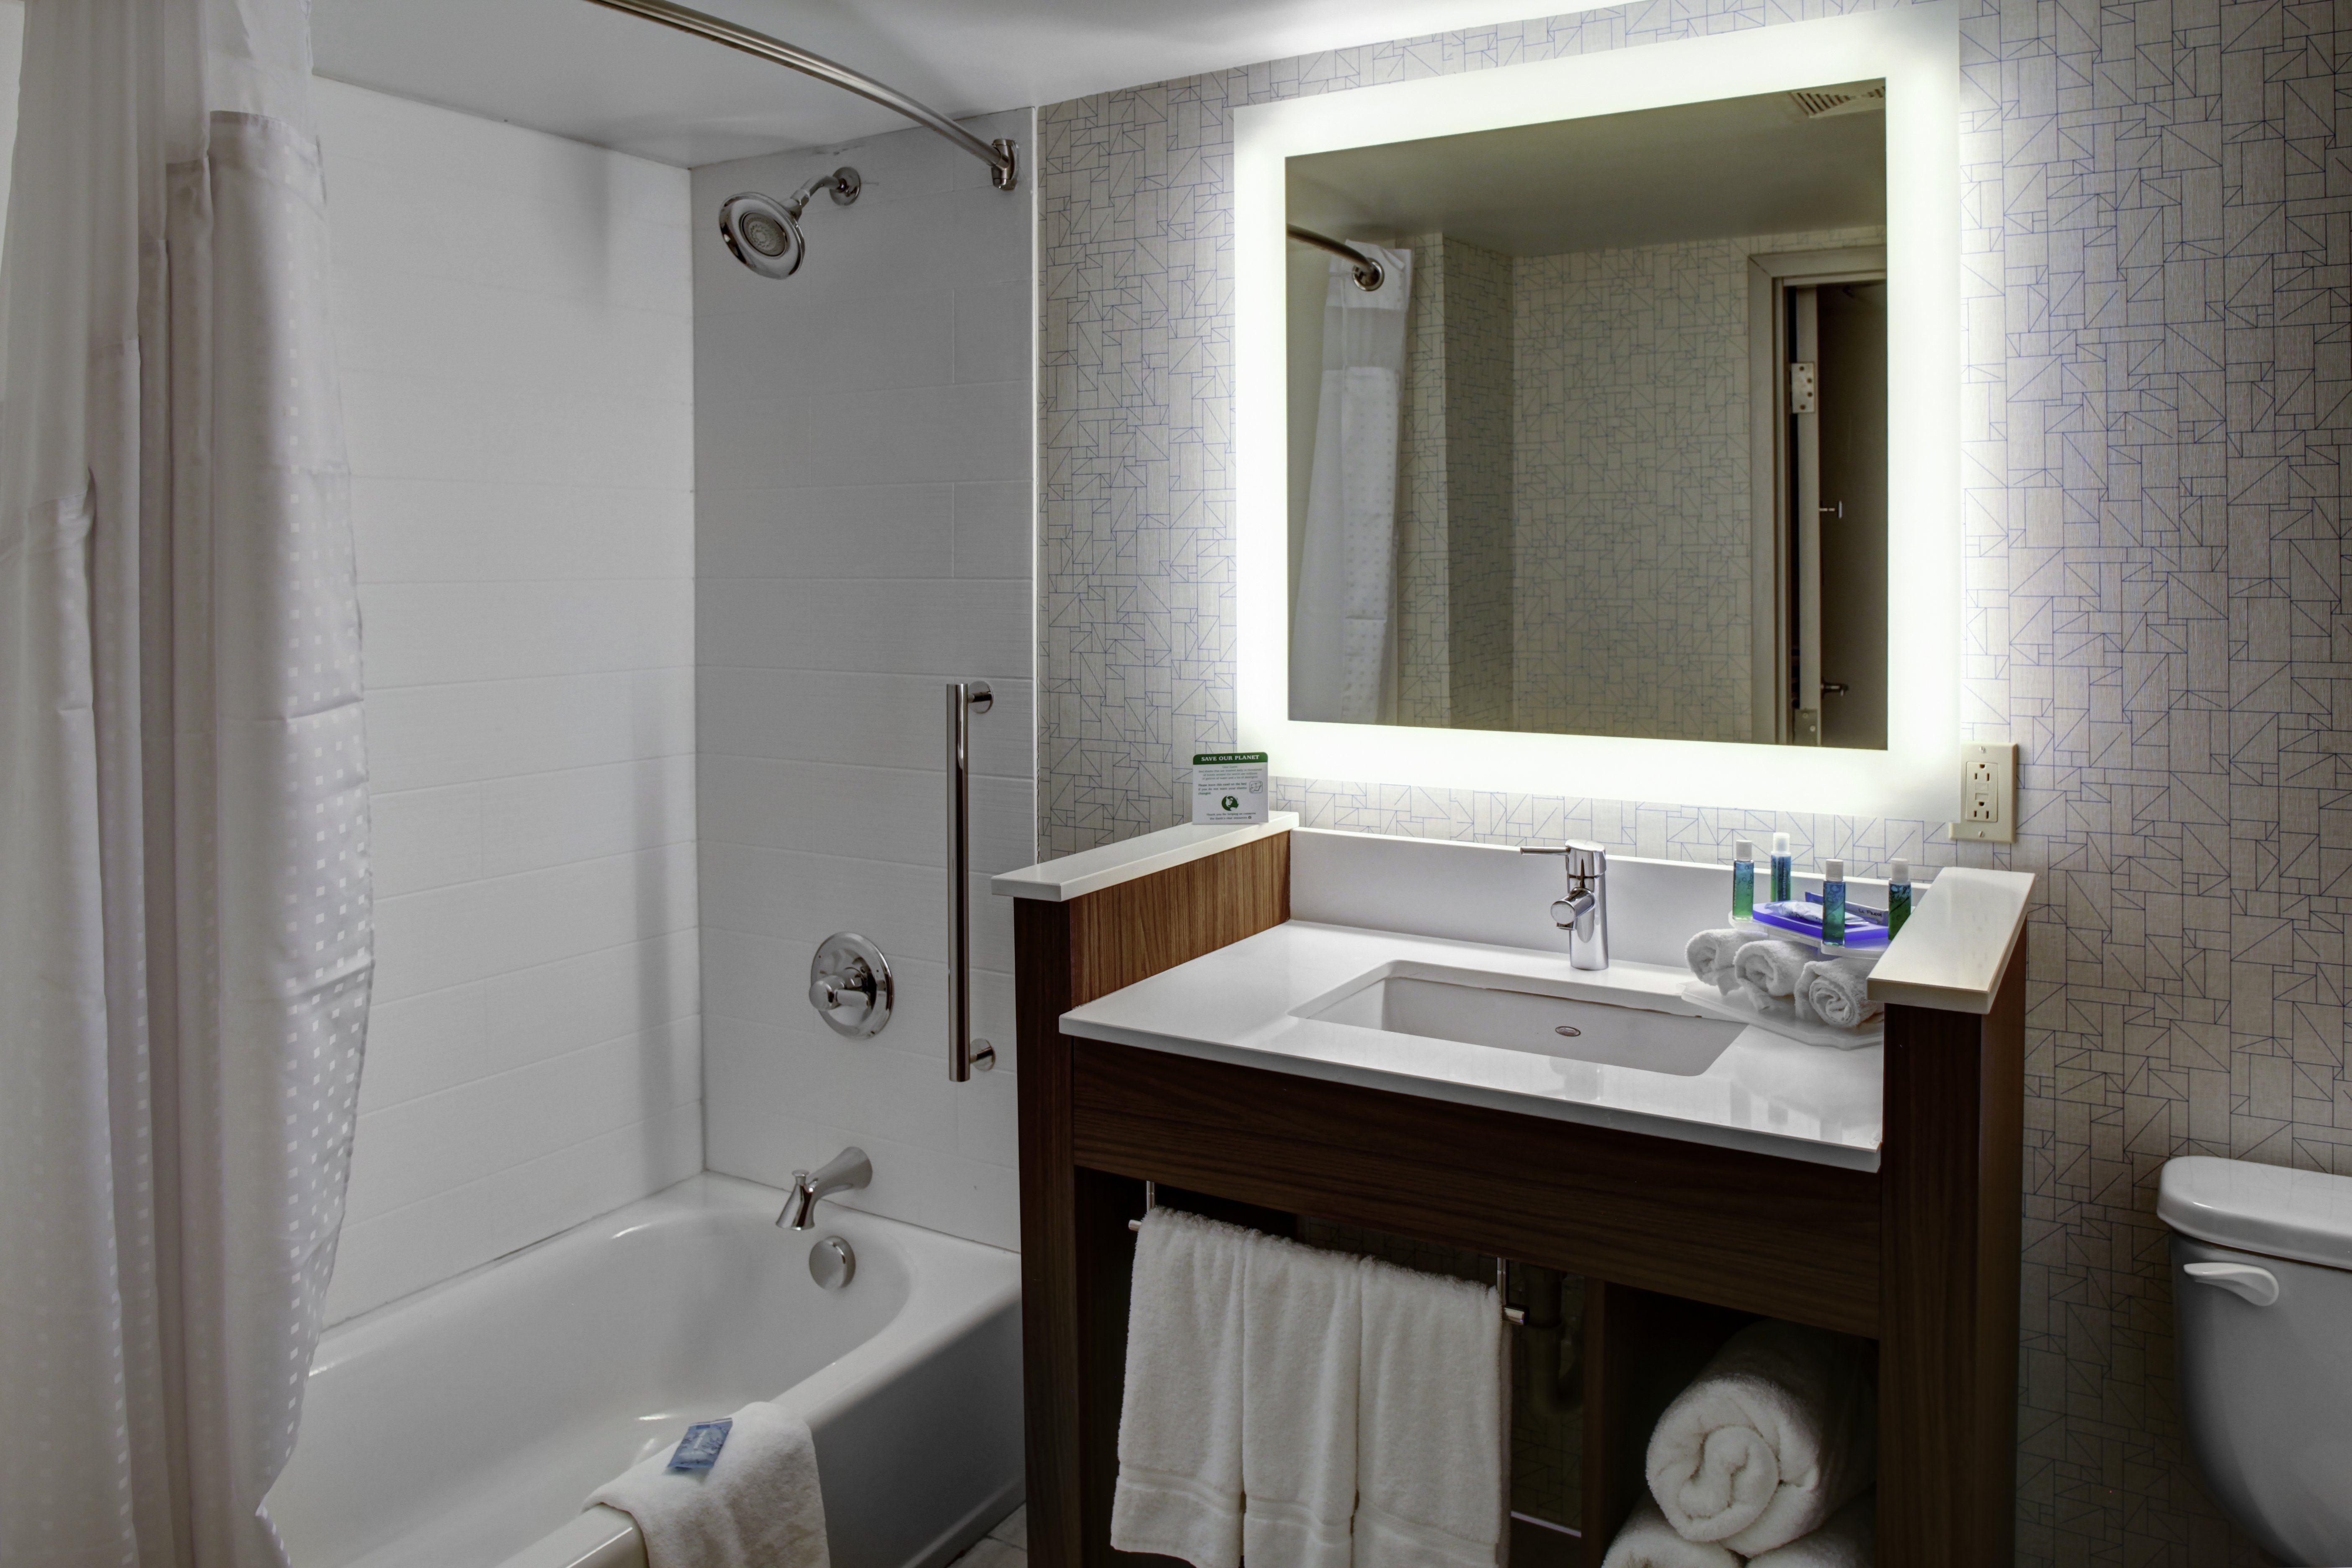 Enjoy Our Well-Lit Bathrooms Equipped With Everything You Need!